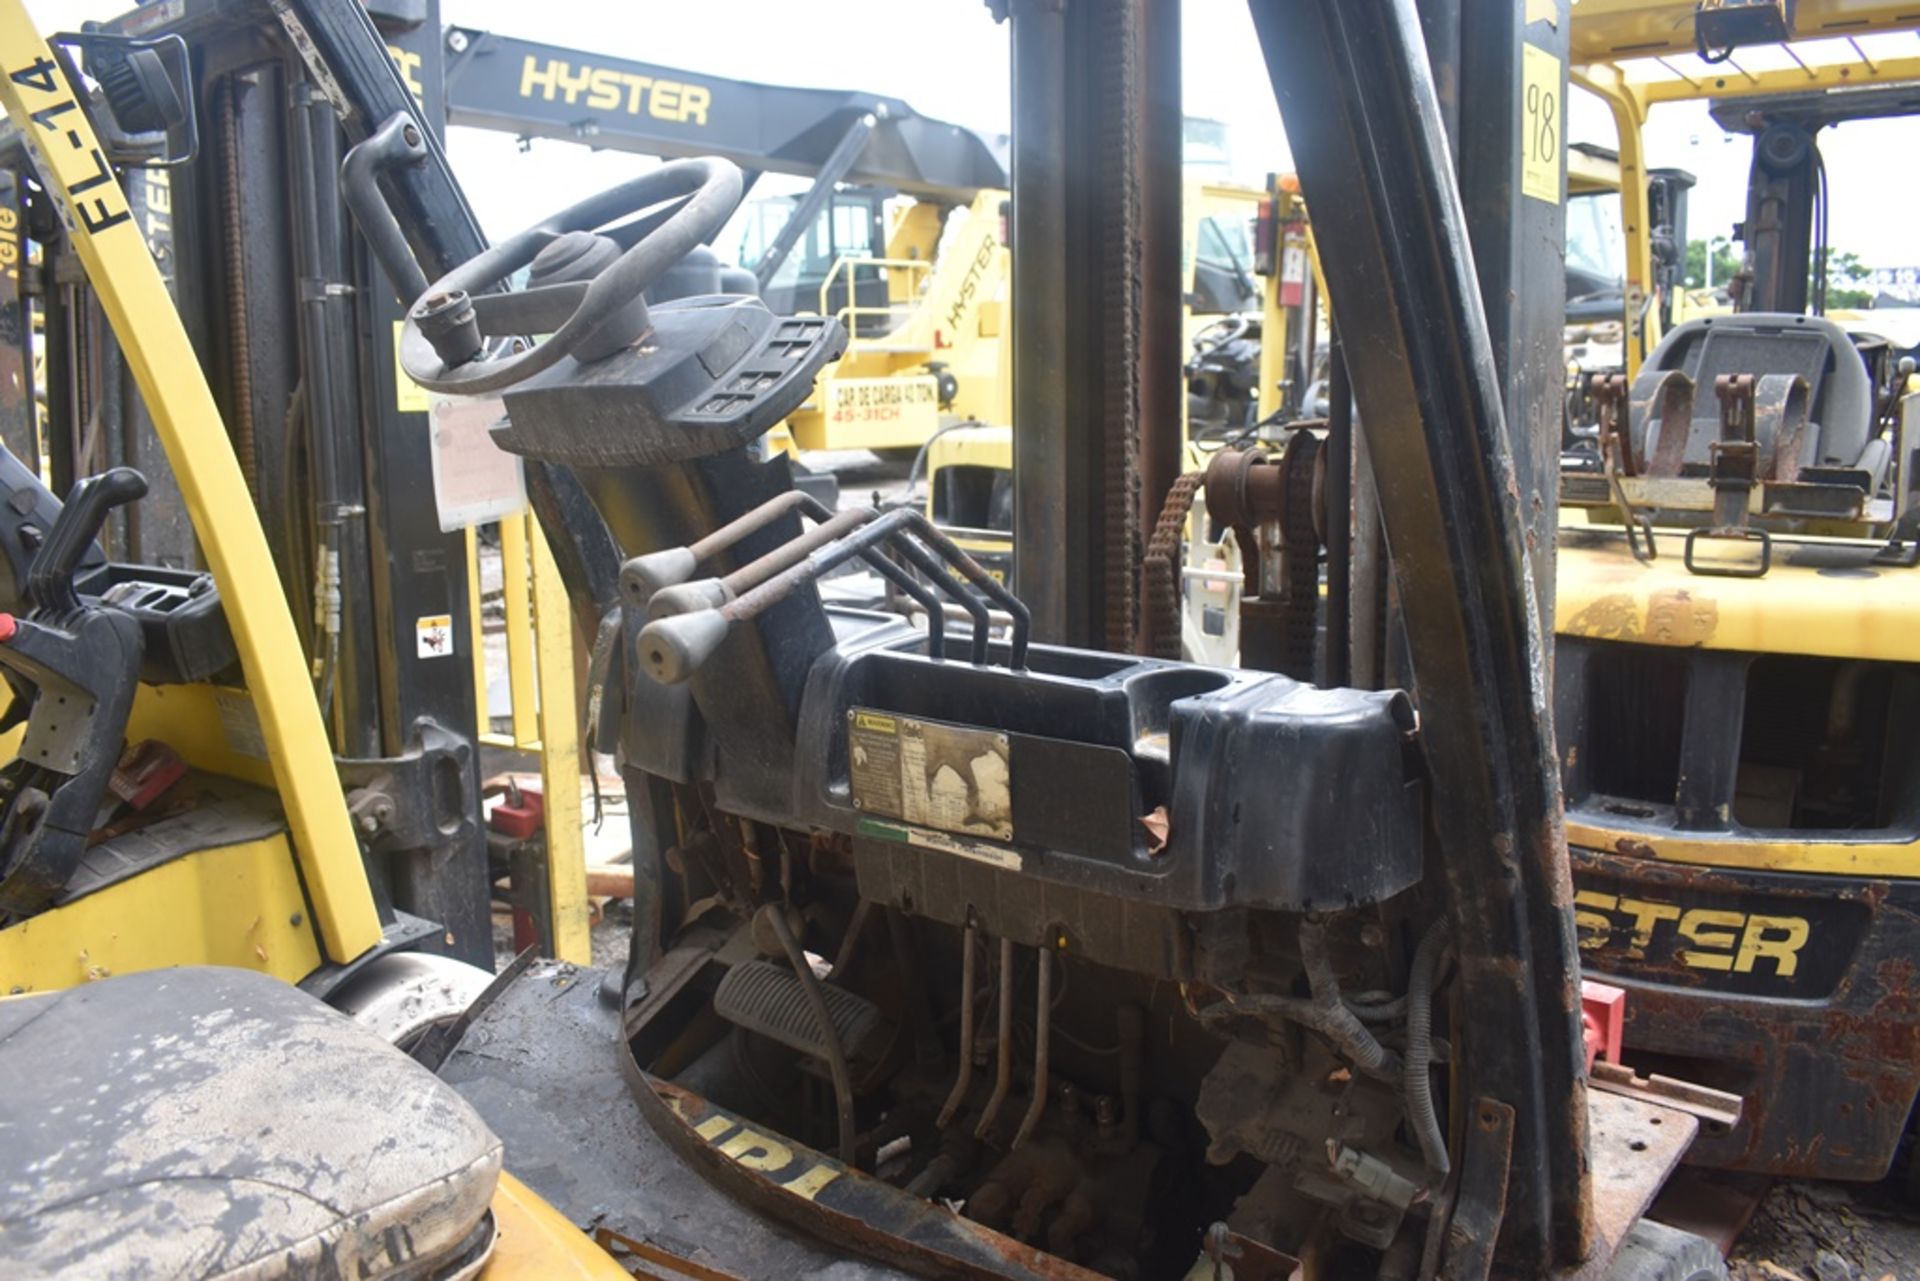 Lot of 4 Forklift, Hyster and Yale - Image 68 of 108